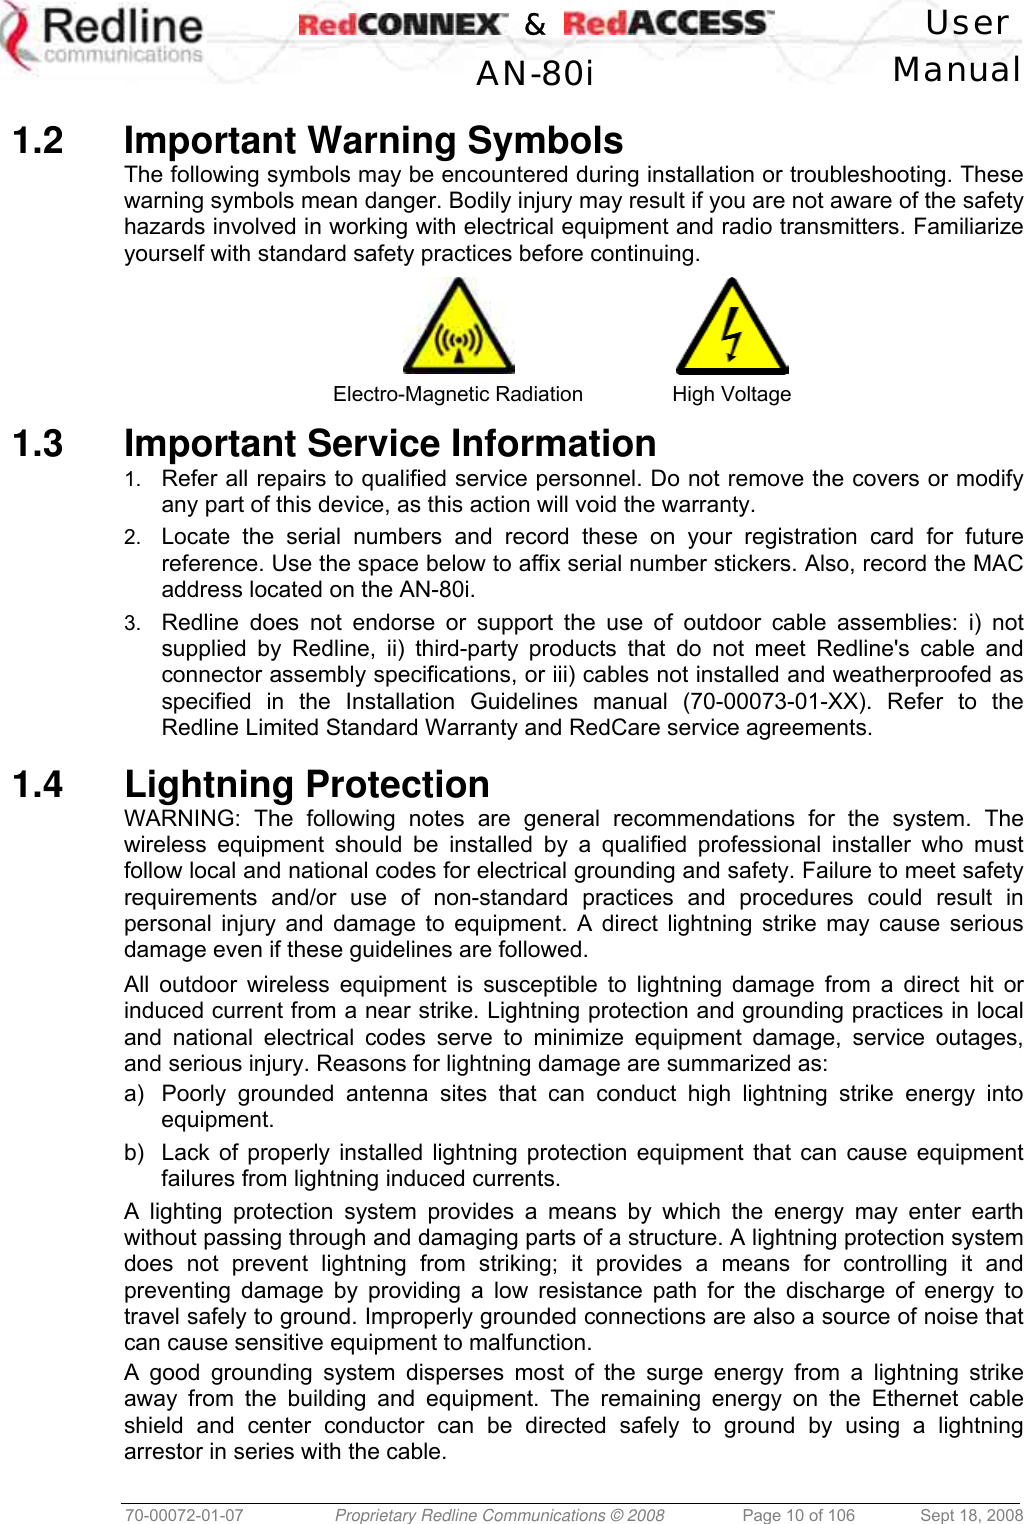    &amp;  User  AN-80i Manual  70-00072-01-07  Proprietary Redline Communications © 2008  Page 10 of 106  Sept 18, 2008  1.2 Important Warning Symbols The following symbols may be encountered during installation or troubleshooting. These warning symbols mean danger. Bodily injury may result if you are not aware of the safety hazards involved in working with electrical equipment and radio transmitters. Familiarize yourself with standard safety practices before continuing.   Electro-Magnetic Radiation  High Voltage 1.3  Important Service Information 1.  Refer all repairs to qualified service personnel. Do not remove the covers or modify any part of this device, as this action will void the warranty. 2.  Locate the serial numbers and record these on your registration card for future reference. Use the space below to affix serial number stickers. Also, record the MAC address located on the AN-80i. 3.  Redline does not endorse or support the use of outdoor cable assemblies: i) not supplied by Redline, ii) third-party products that do not meet Redline&apos;s cable and connector assembly specifications, or iii) cables not installed and weatherproofed as specified in the Installation Guidelines manual (70-00073-01-XX). Refer to the Redline Limited Standard Warranty and RedCare service agreements.  1.4 Lightning Protection WARNING: The following notes are general recommendations for the system. The wireless equipment should be installed by a qualified professional installer who must follow local and national codes for electrical grounding and safety. Failure to meet safety requirements and/or use of non-standard practices and procedures could result in personal injury and damage to equipment. A direct lightning strike may cause serious damage even if these guidelines are followed. All outdoor wireless equipment is susceptible to lightning damage from a direct hit or induced current from a near strike. Lightning protection and grounding practices in local and national electrical codes serve to minimize equipment damage, service outages, and serious injury. Reasons for lightning damage are summarized as: a)  Poorly grounded antenna sites that can conduct high lightning strike energy into equipment. b)  Lack of properly installed lightning protection equipment that can cause equipment failures from lightning induced currents. A lighting protection system provides a means by which the energy may enter earth without passing through and damaging parts of a structure. A lightning protection system does not prevent lightning from striking; it provides a means for controlling it and preventing damage by providing a low resistance path for the discharge of energy to travel safely to ground. Improperly grounded connections are also a source of noise that can cause sensitive equipment to malfunction. A good grounding system disperses most of the surge energy from a lightning strike away from the building and equipment. The remaining energy on the Ethernet cable shield and center conductor can be directed safely to ground by using a lightning arrestor in series with the cable. 